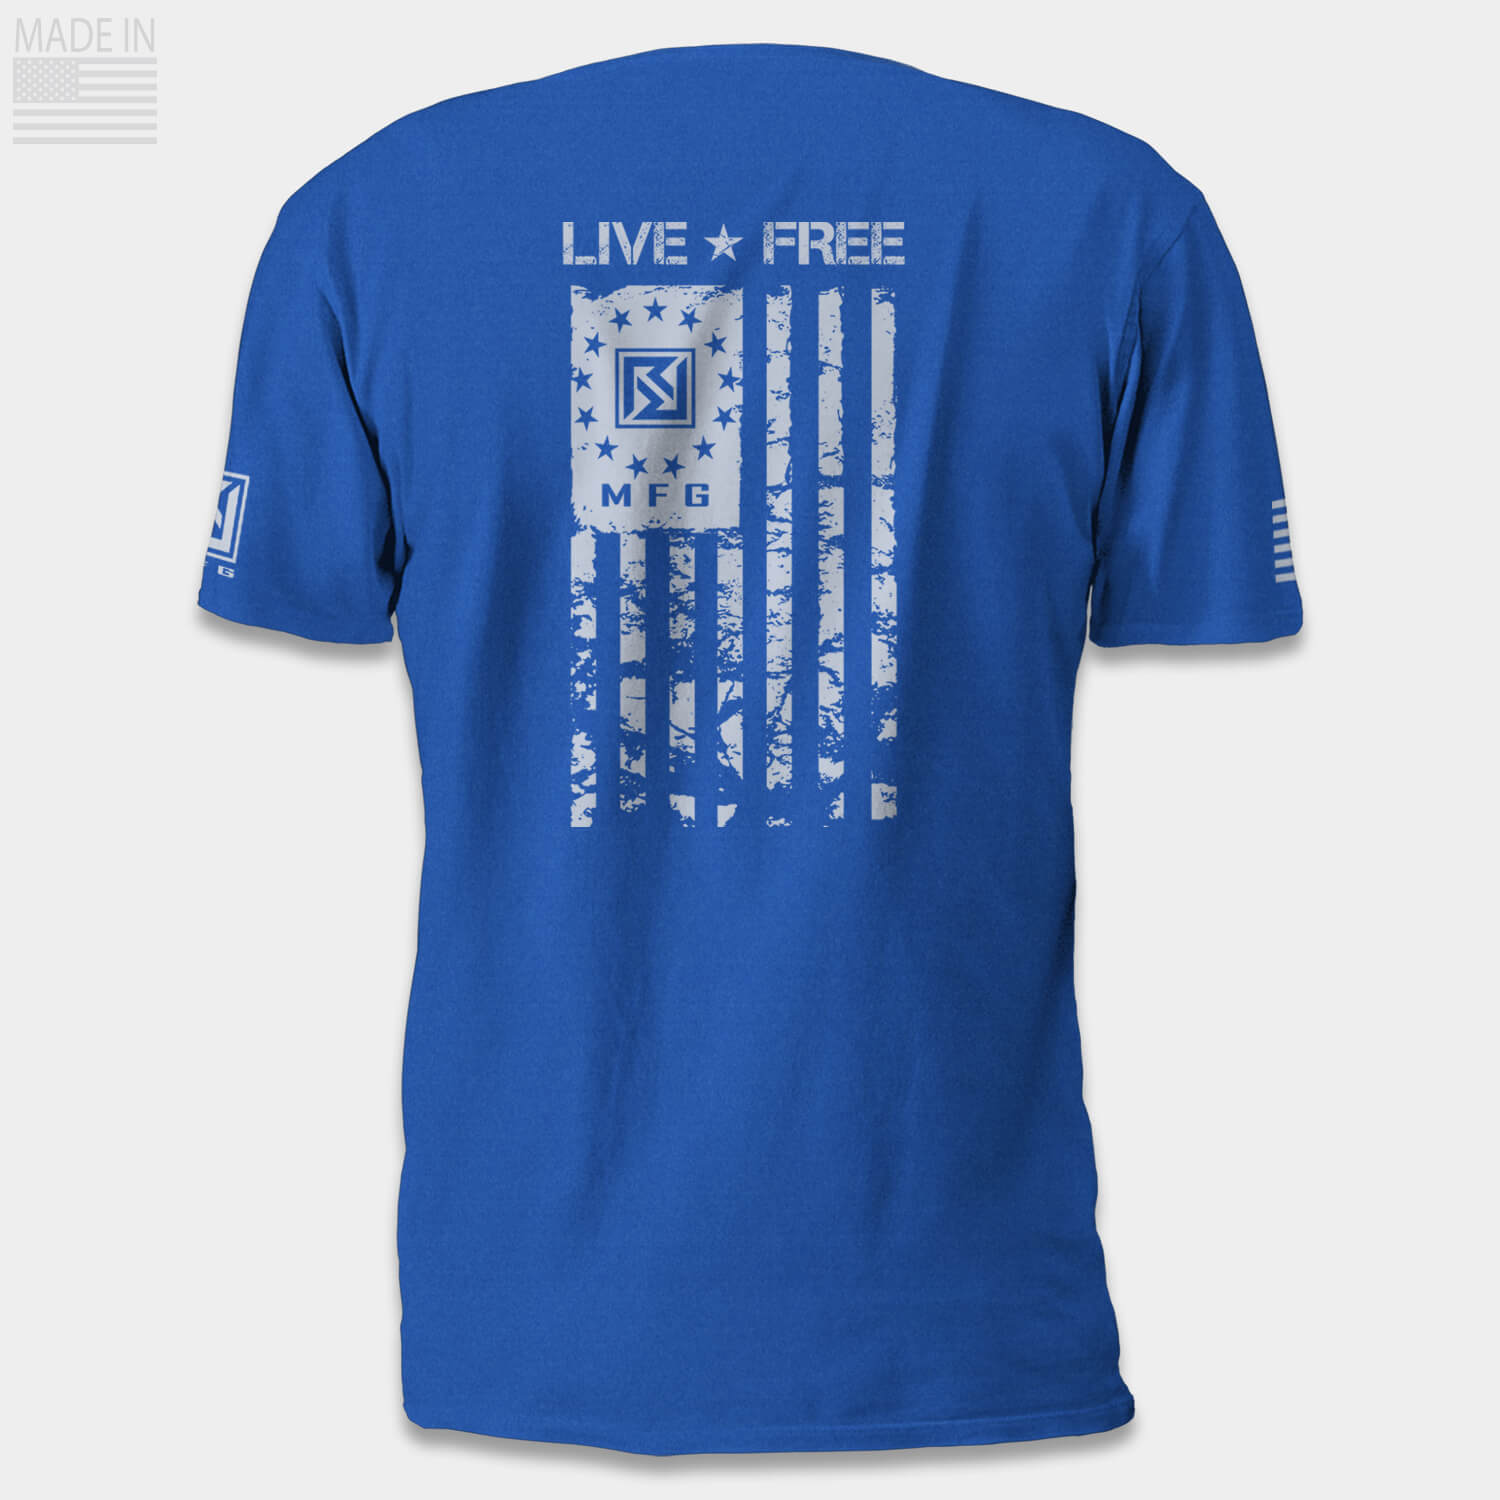 Heather Blue Made in America Live Free Betsy Ross Tee